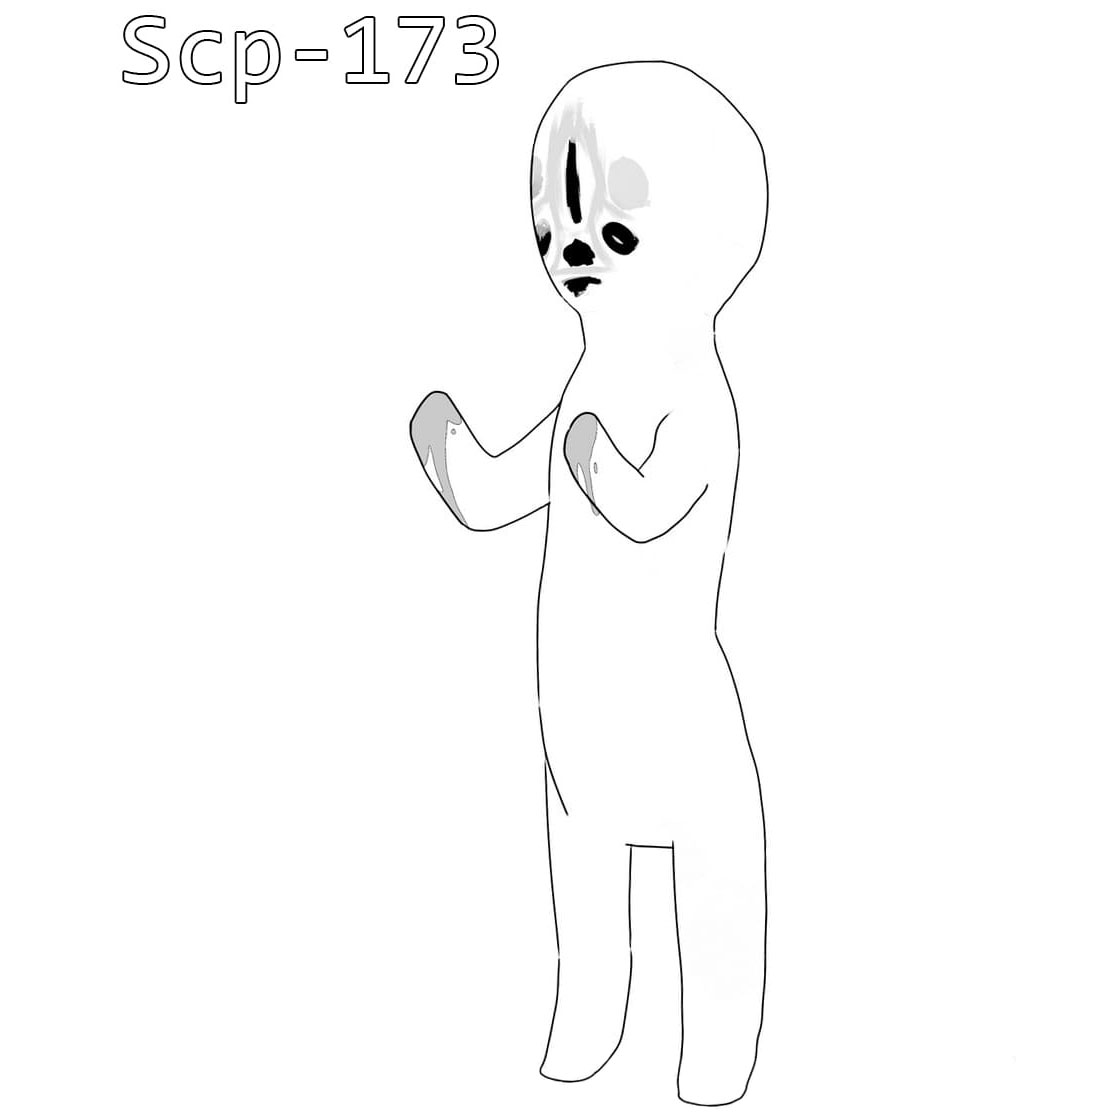 Free Scp-173 Coloring Pages Lineart printable